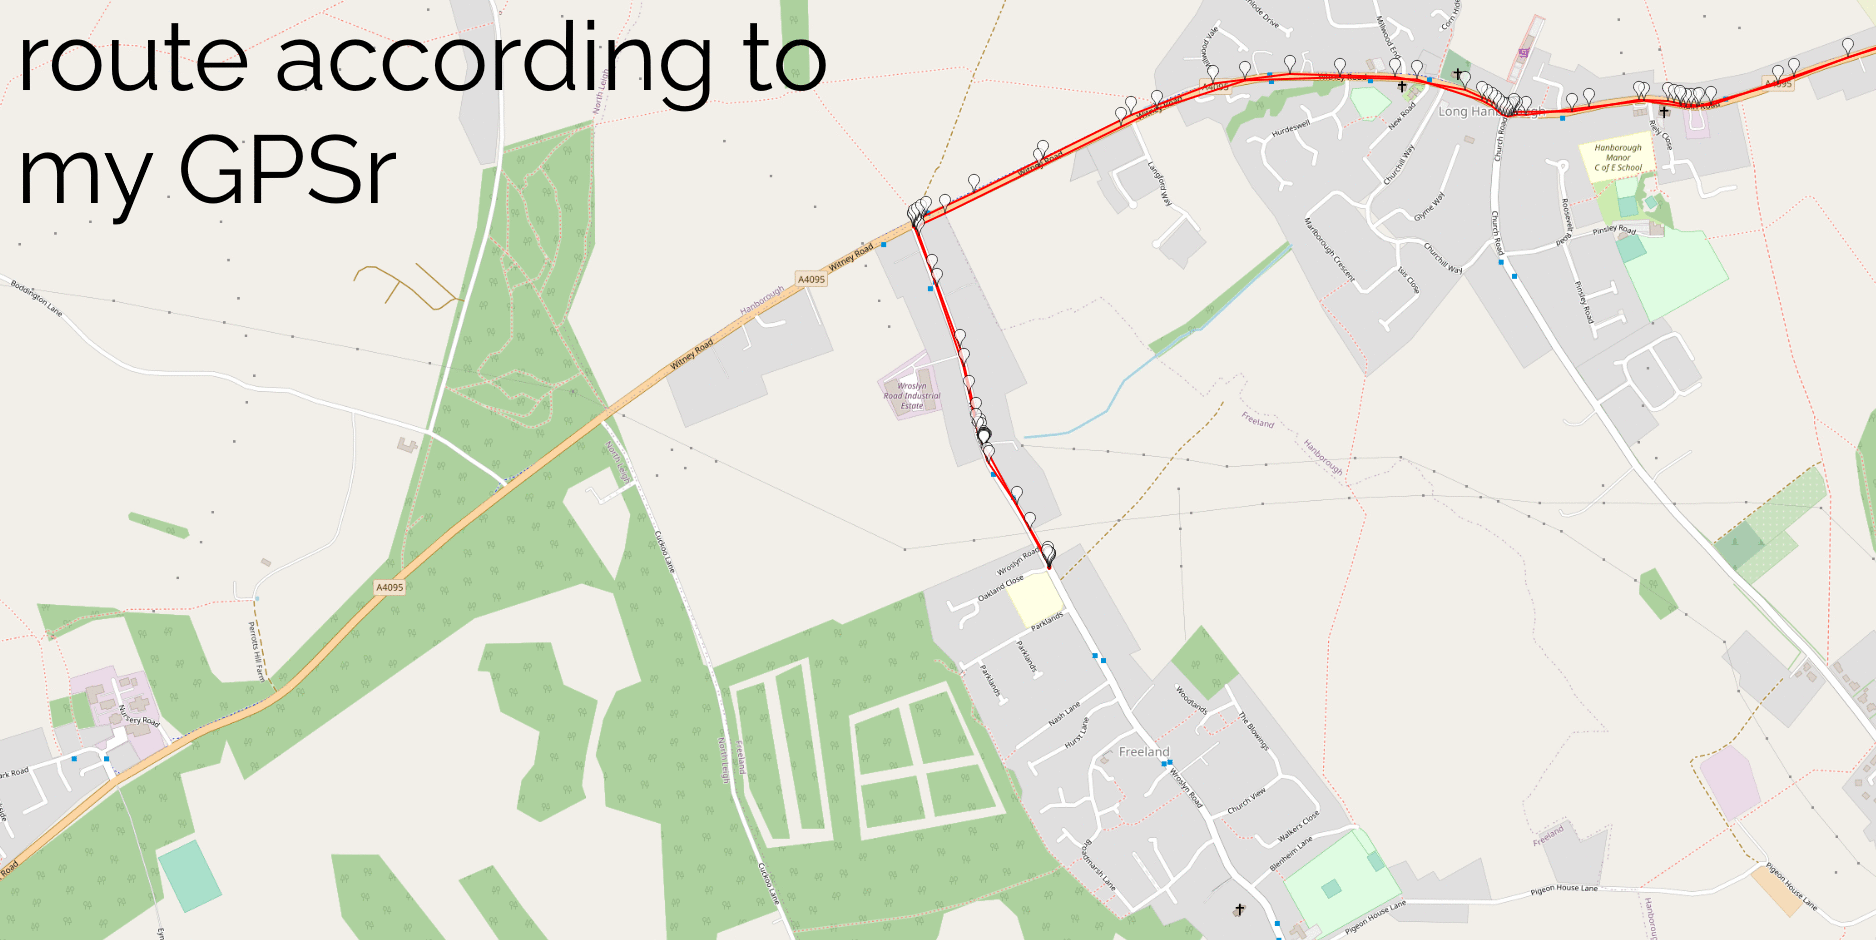 GIF animation comparing routes recorded by Google My Location with those recorded by my GPSr: they're almost identical